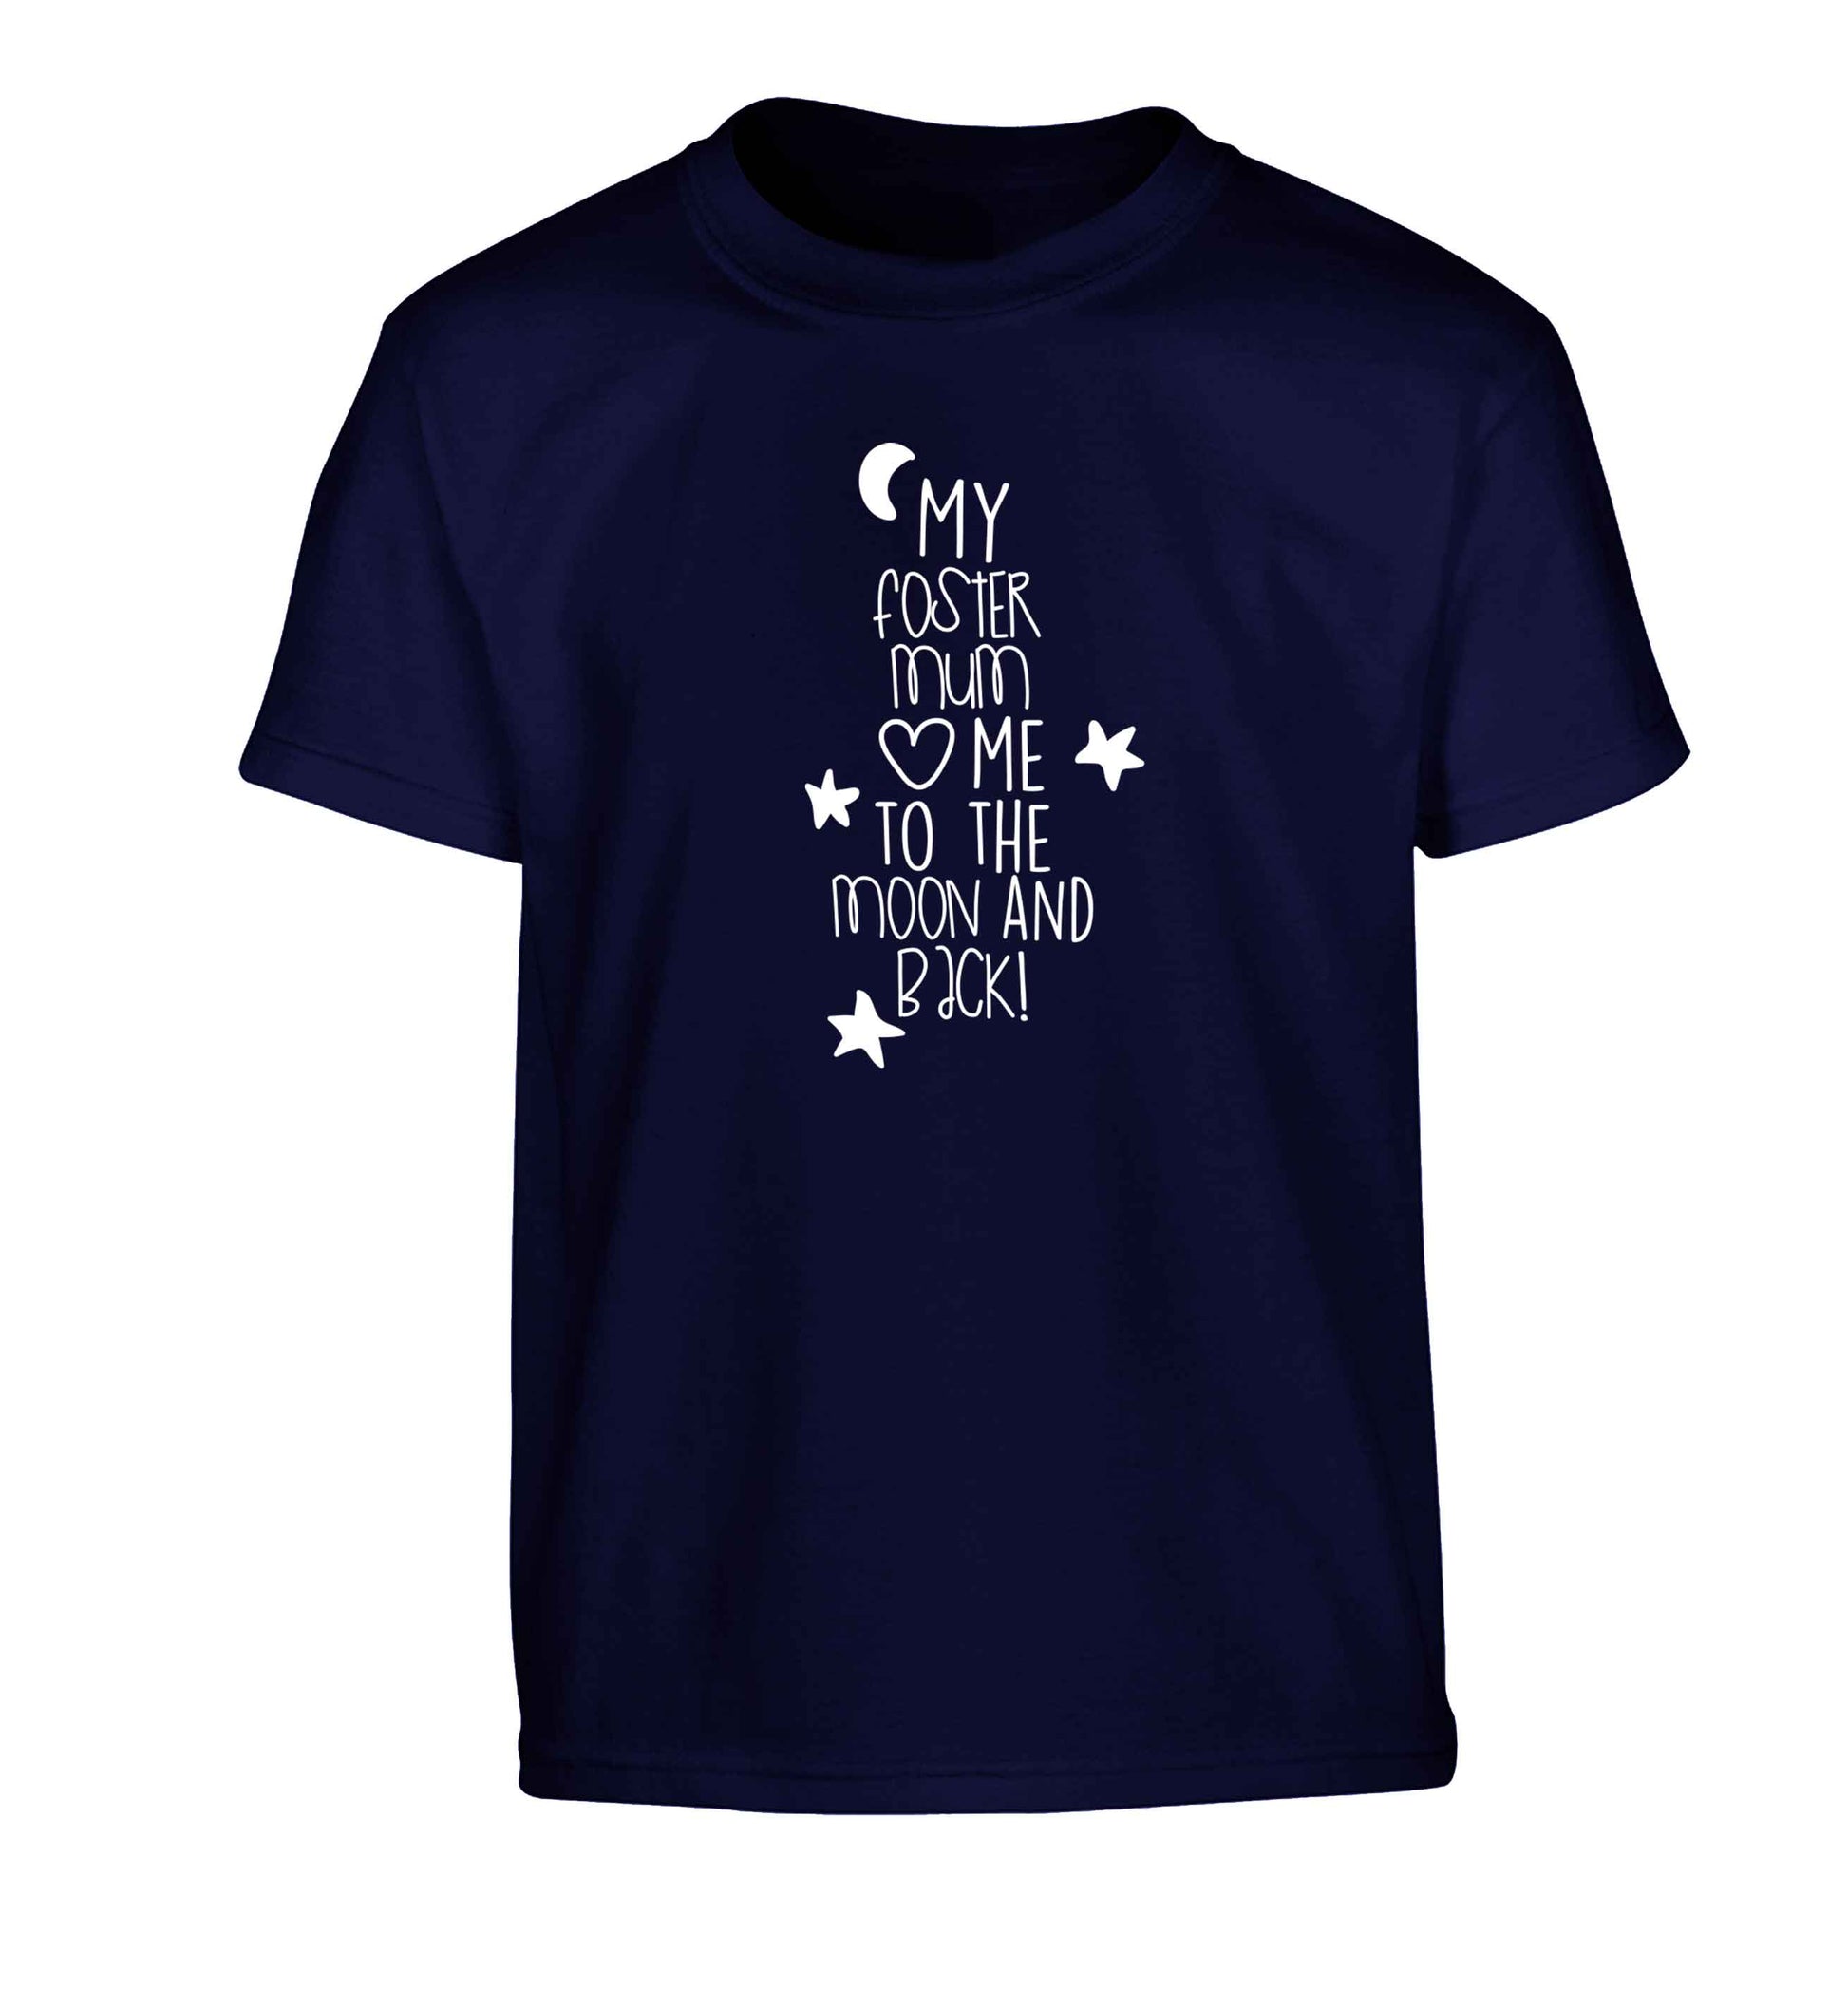 My foster mum loves me to the moon and back Children's navy Tshirt 12-13 Years